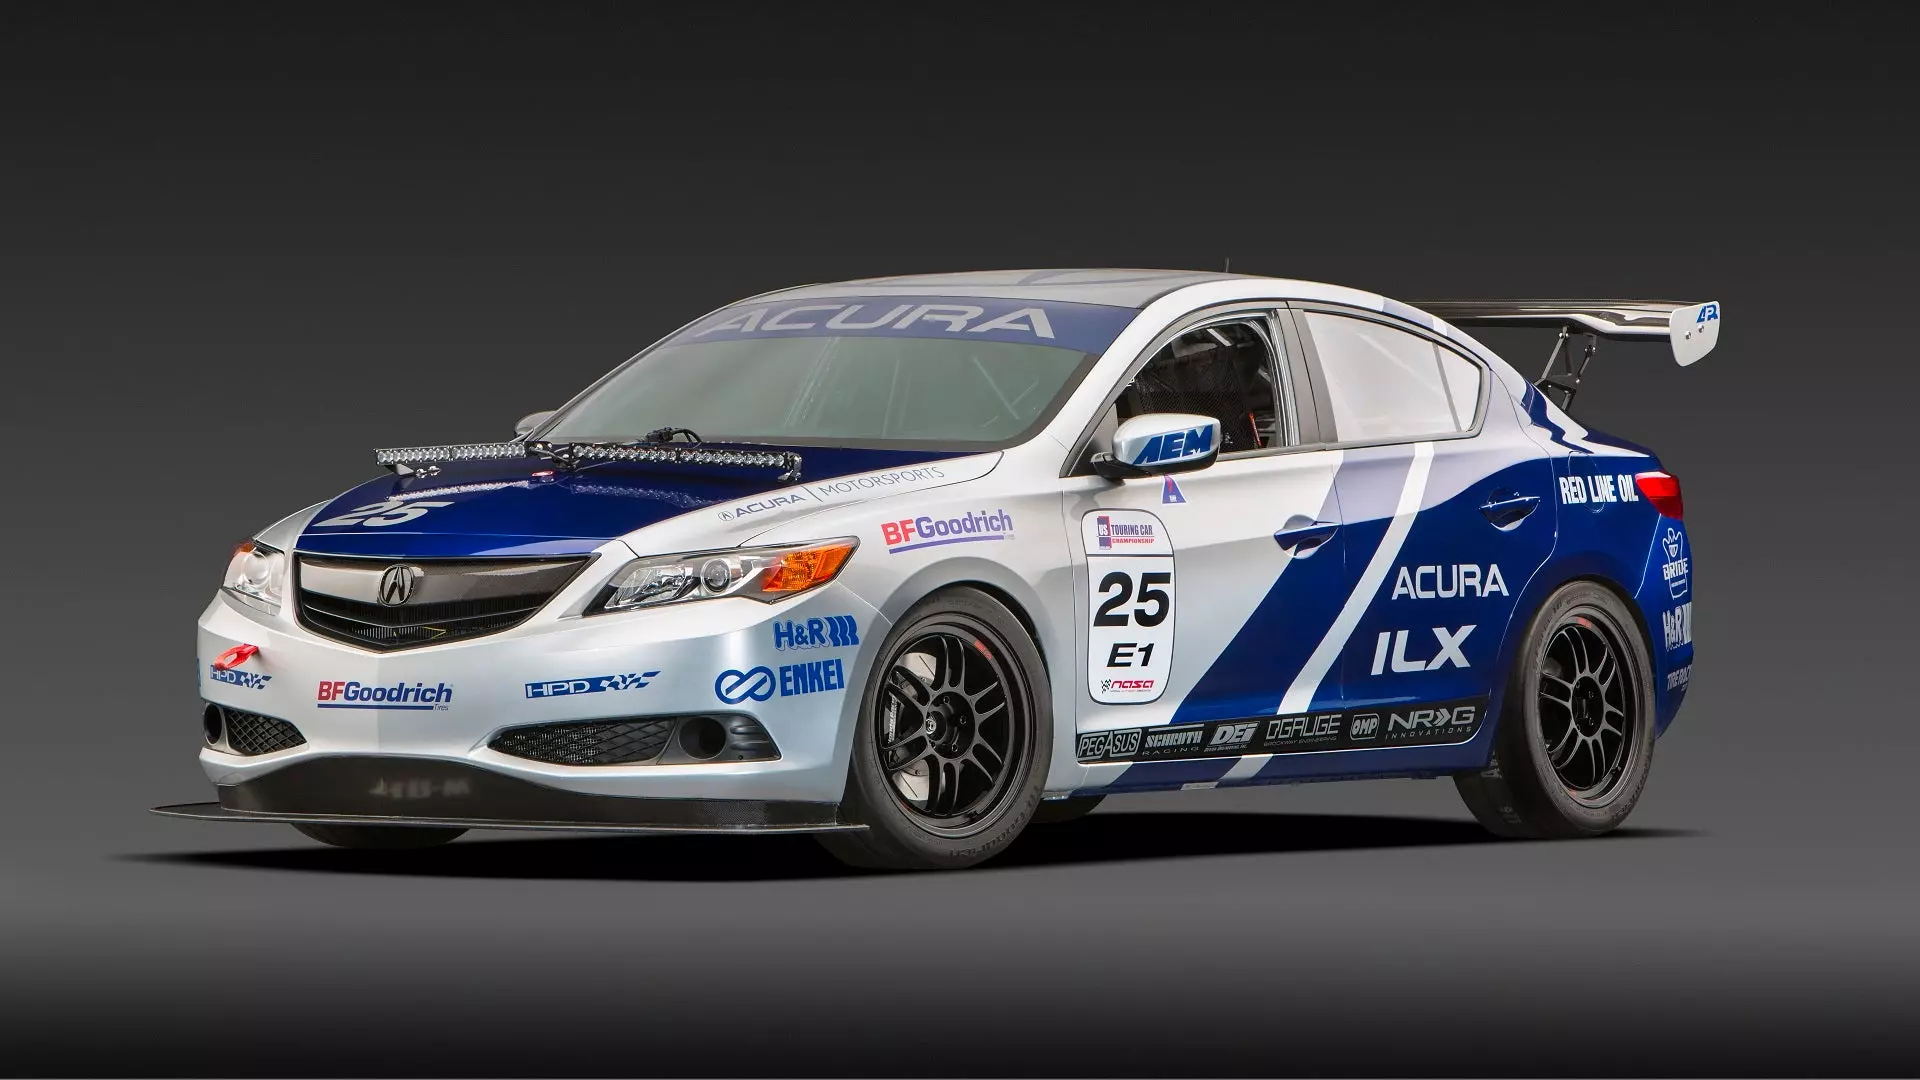 The Overlooked Acura ILX Completely Transforms When in Racecar Garb | Autance